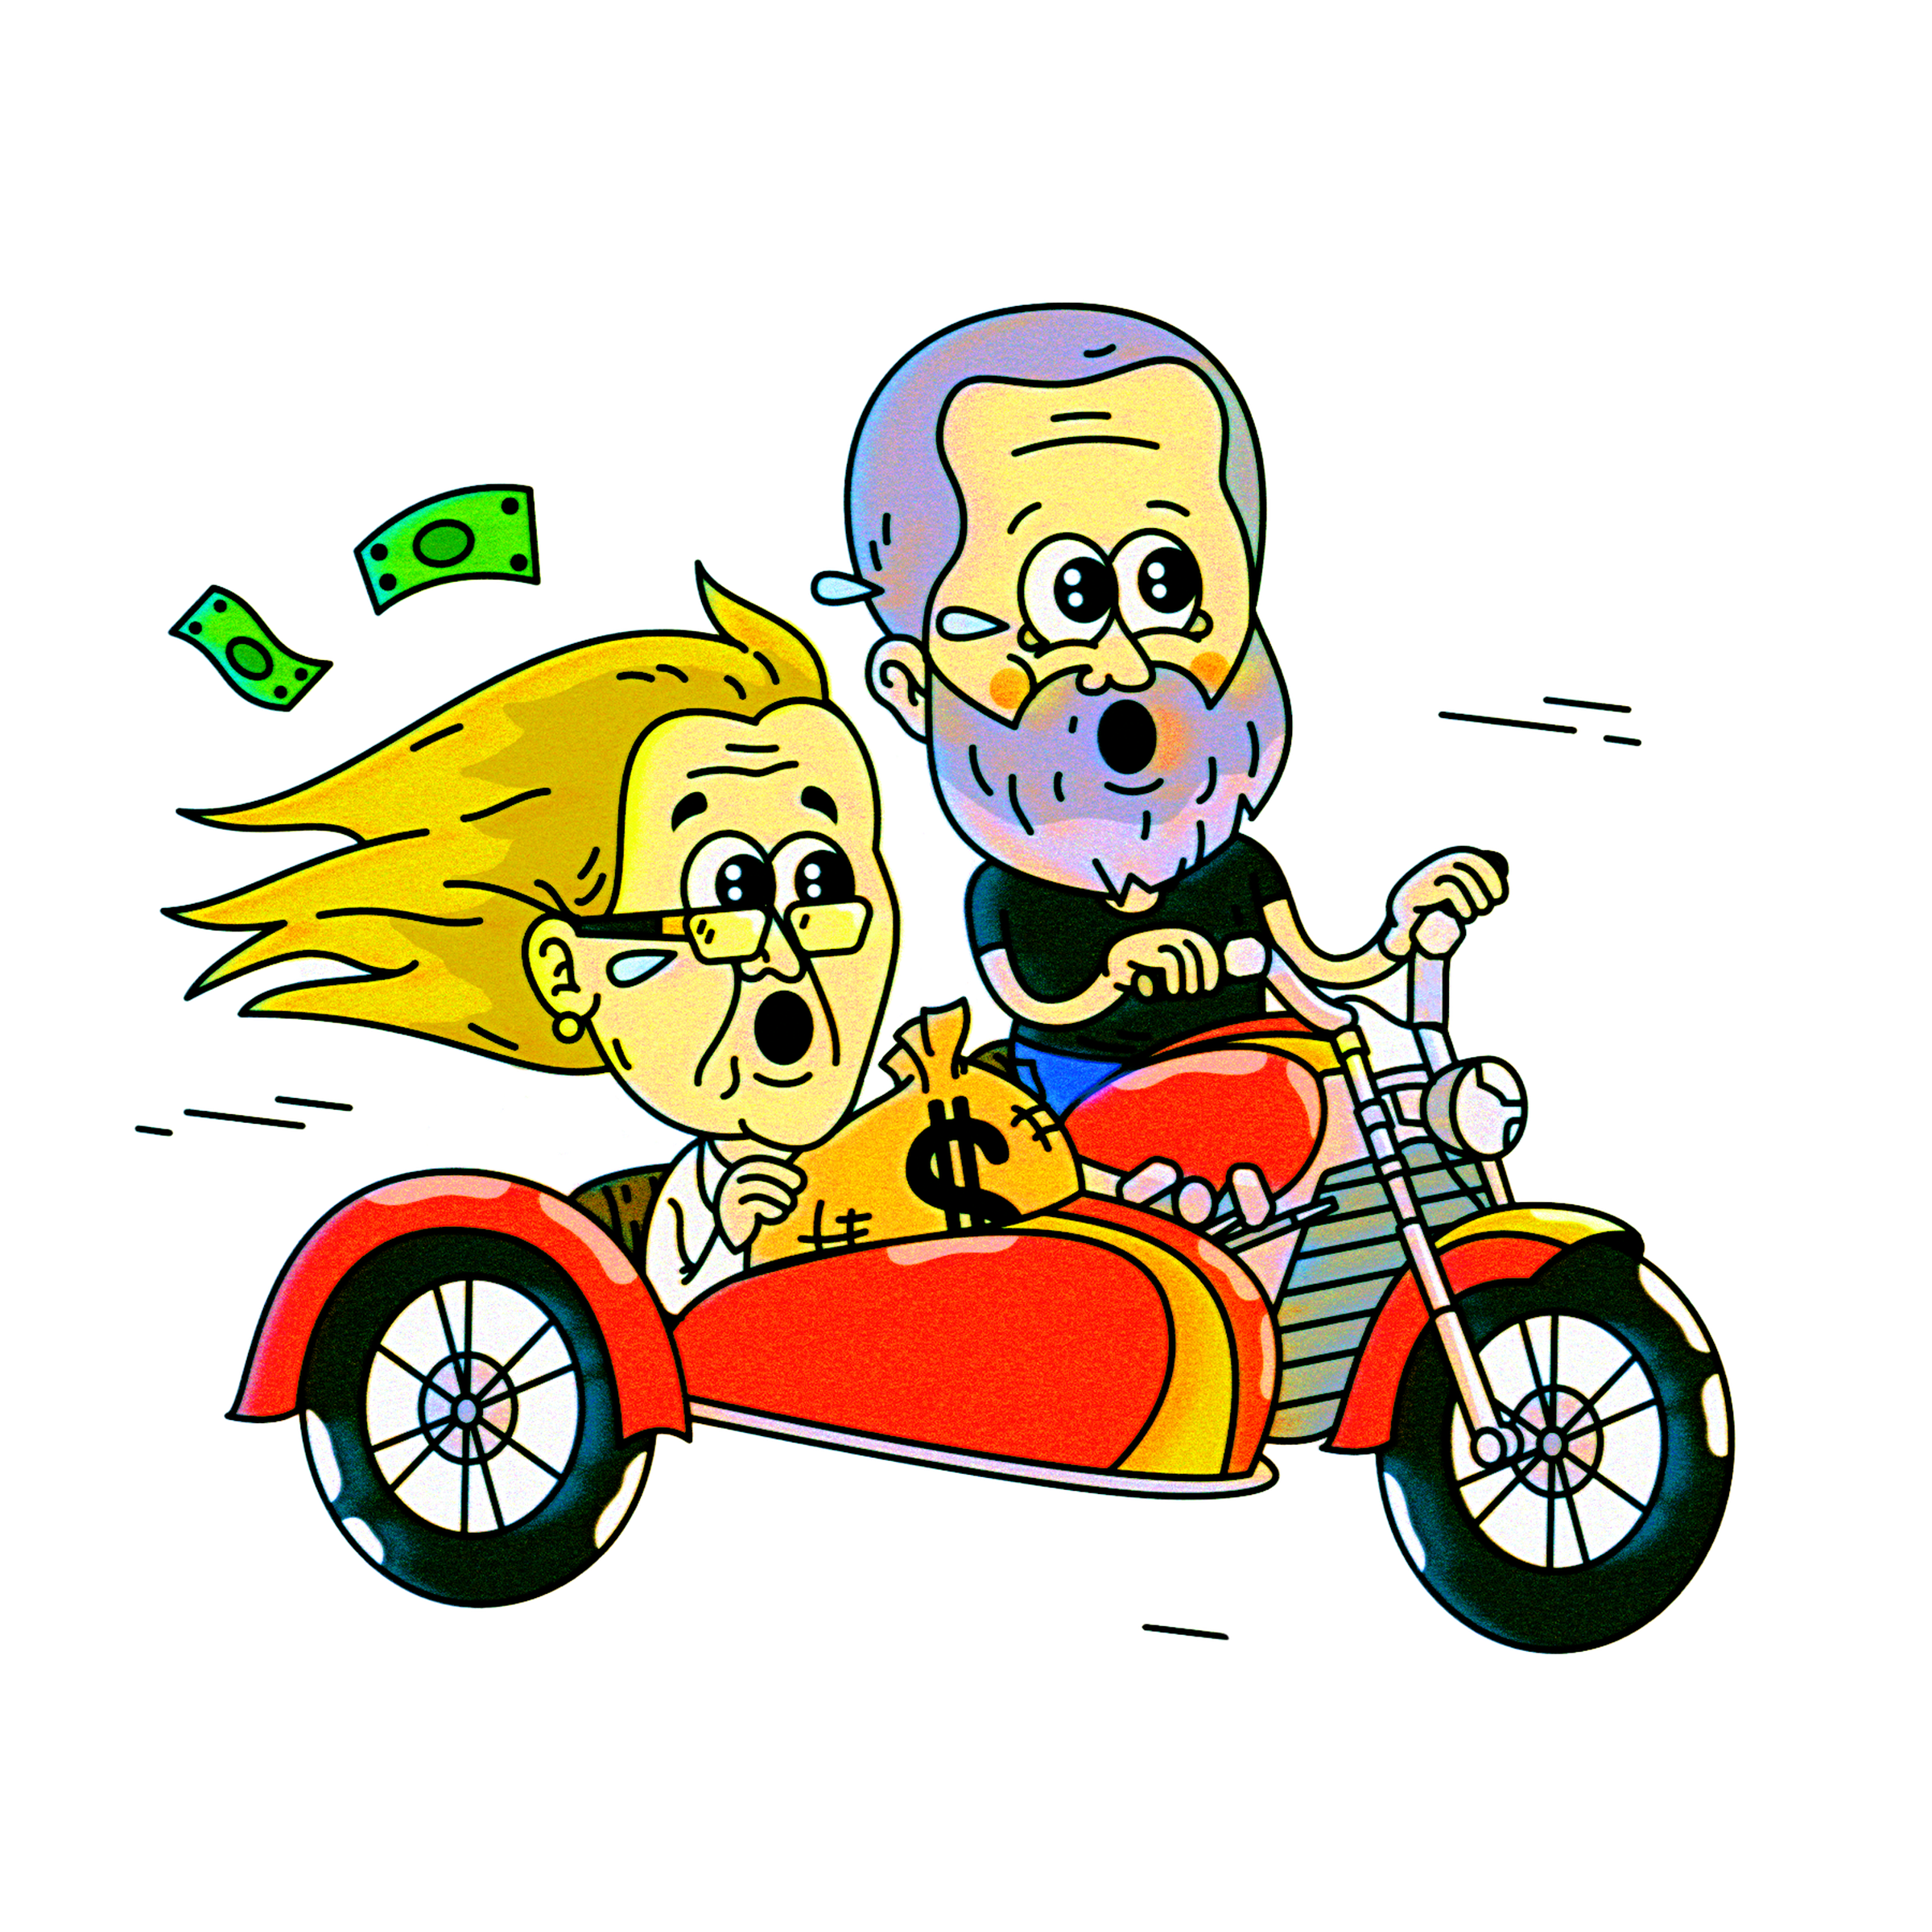 Cartoon of Shane Smith on a motorcycle with Nancy Dubuc in the sidecar, escaping with a bag of money. 